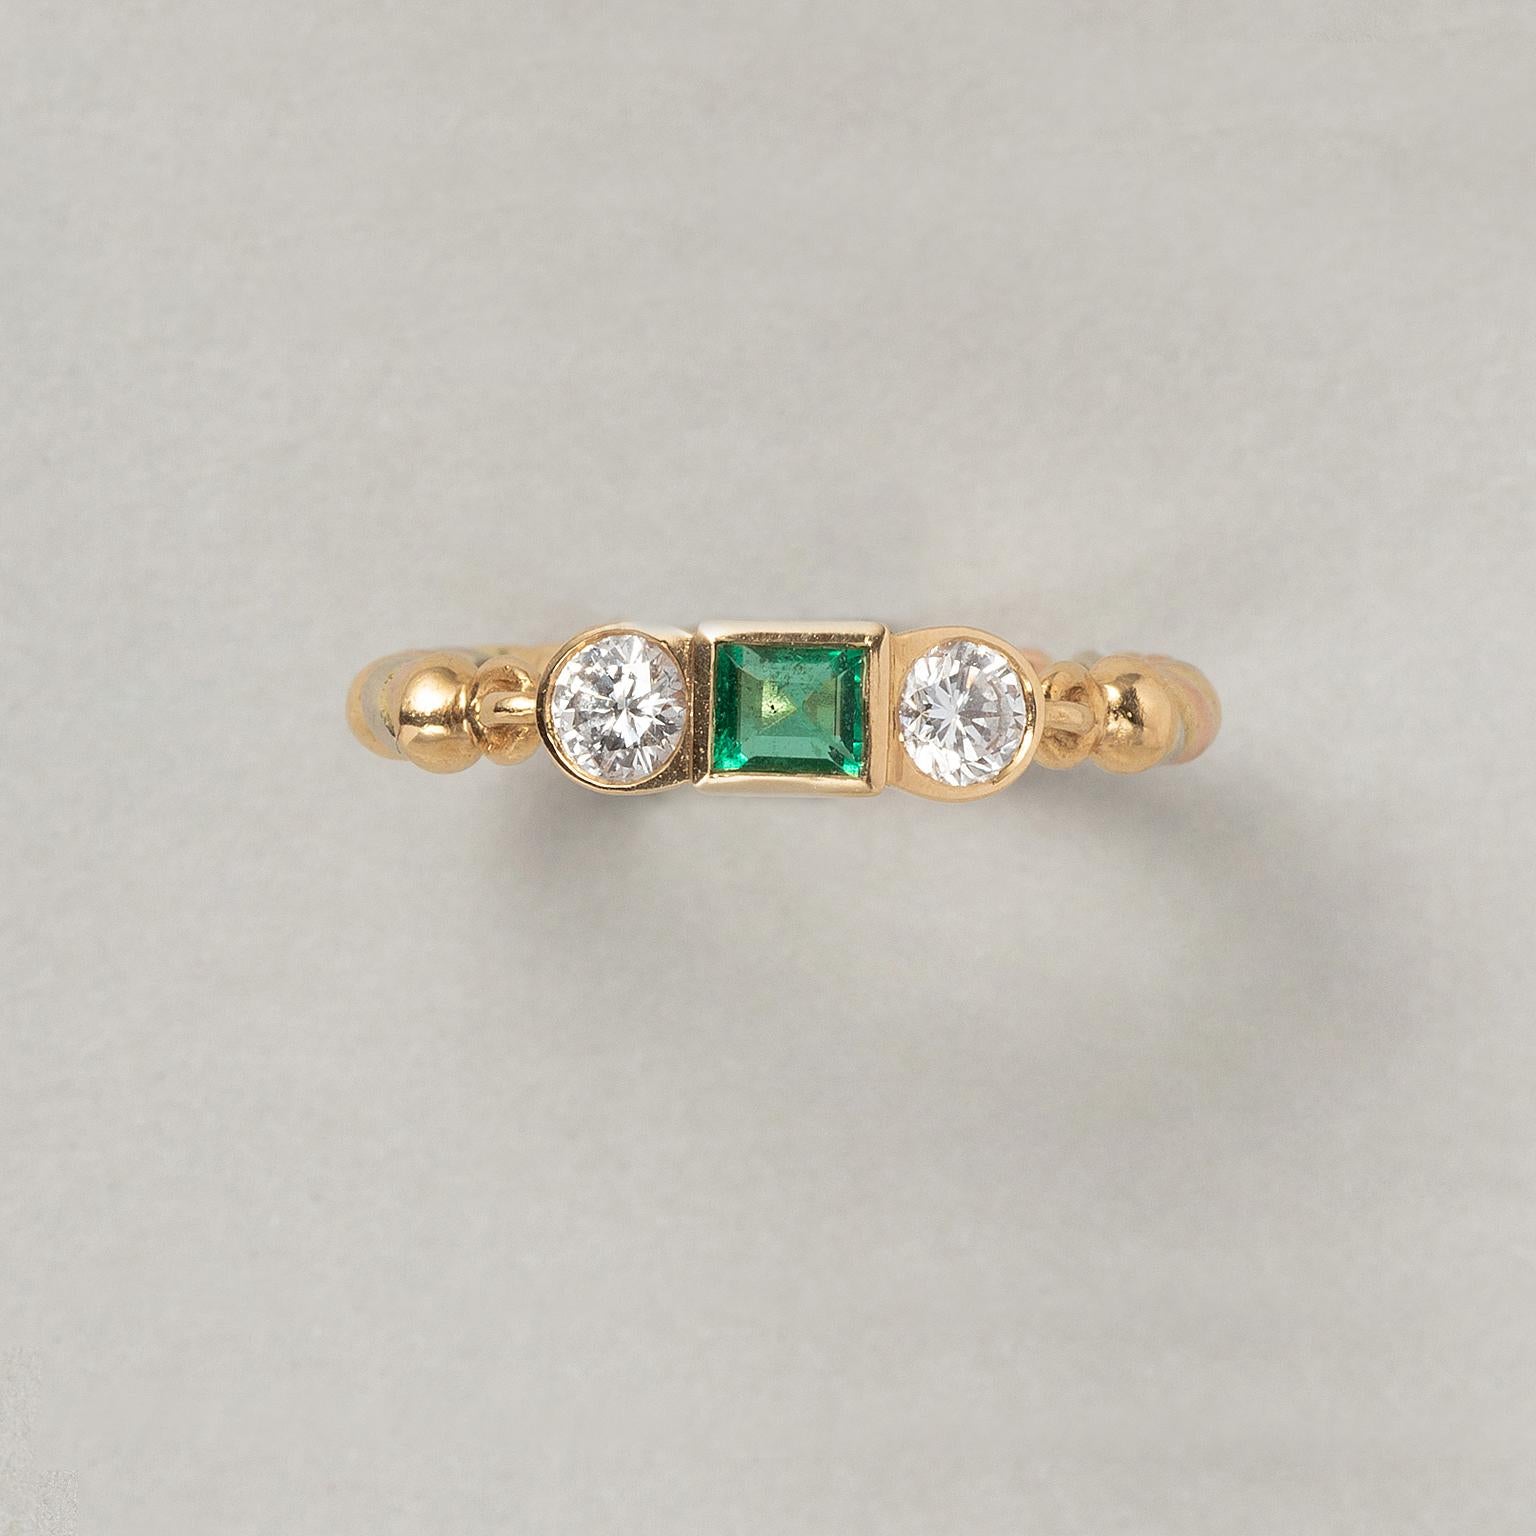 An 18 carat gold ring with a carré cut emerald and a brilliant cut diamond on each side, the shank is a fized twisted tri-color gold thread, signed and numbered: Cartier, 294065, circa 1987-1990.

weight: 2.71 grams
ring size: 16.5 mm. / 6 US.